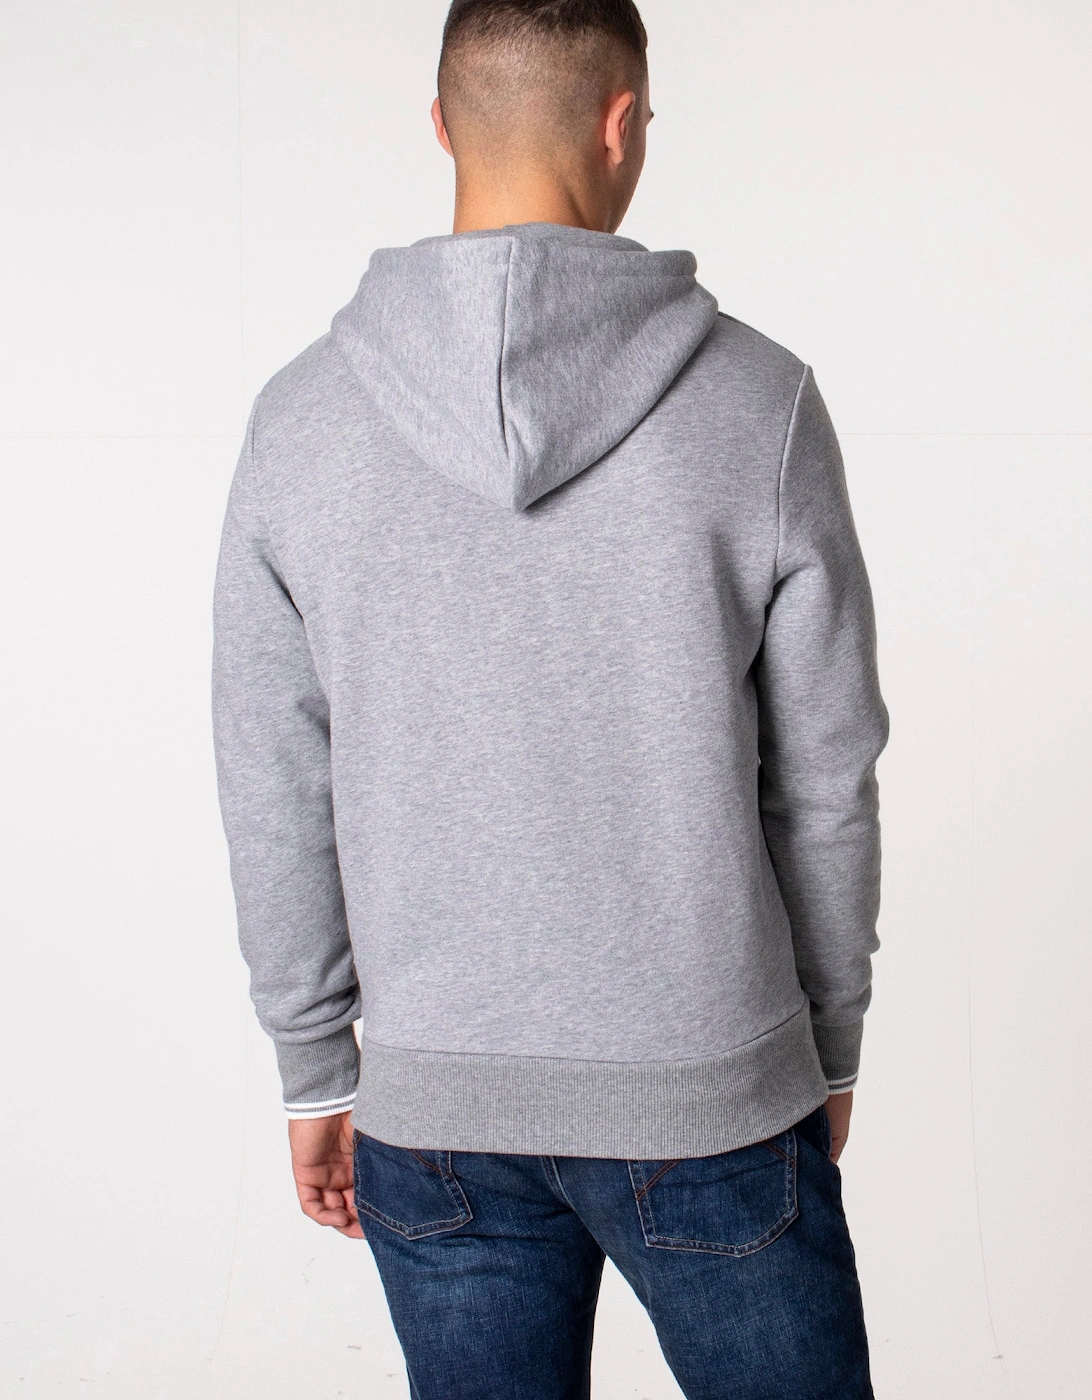 Twin Tipped Hoodie